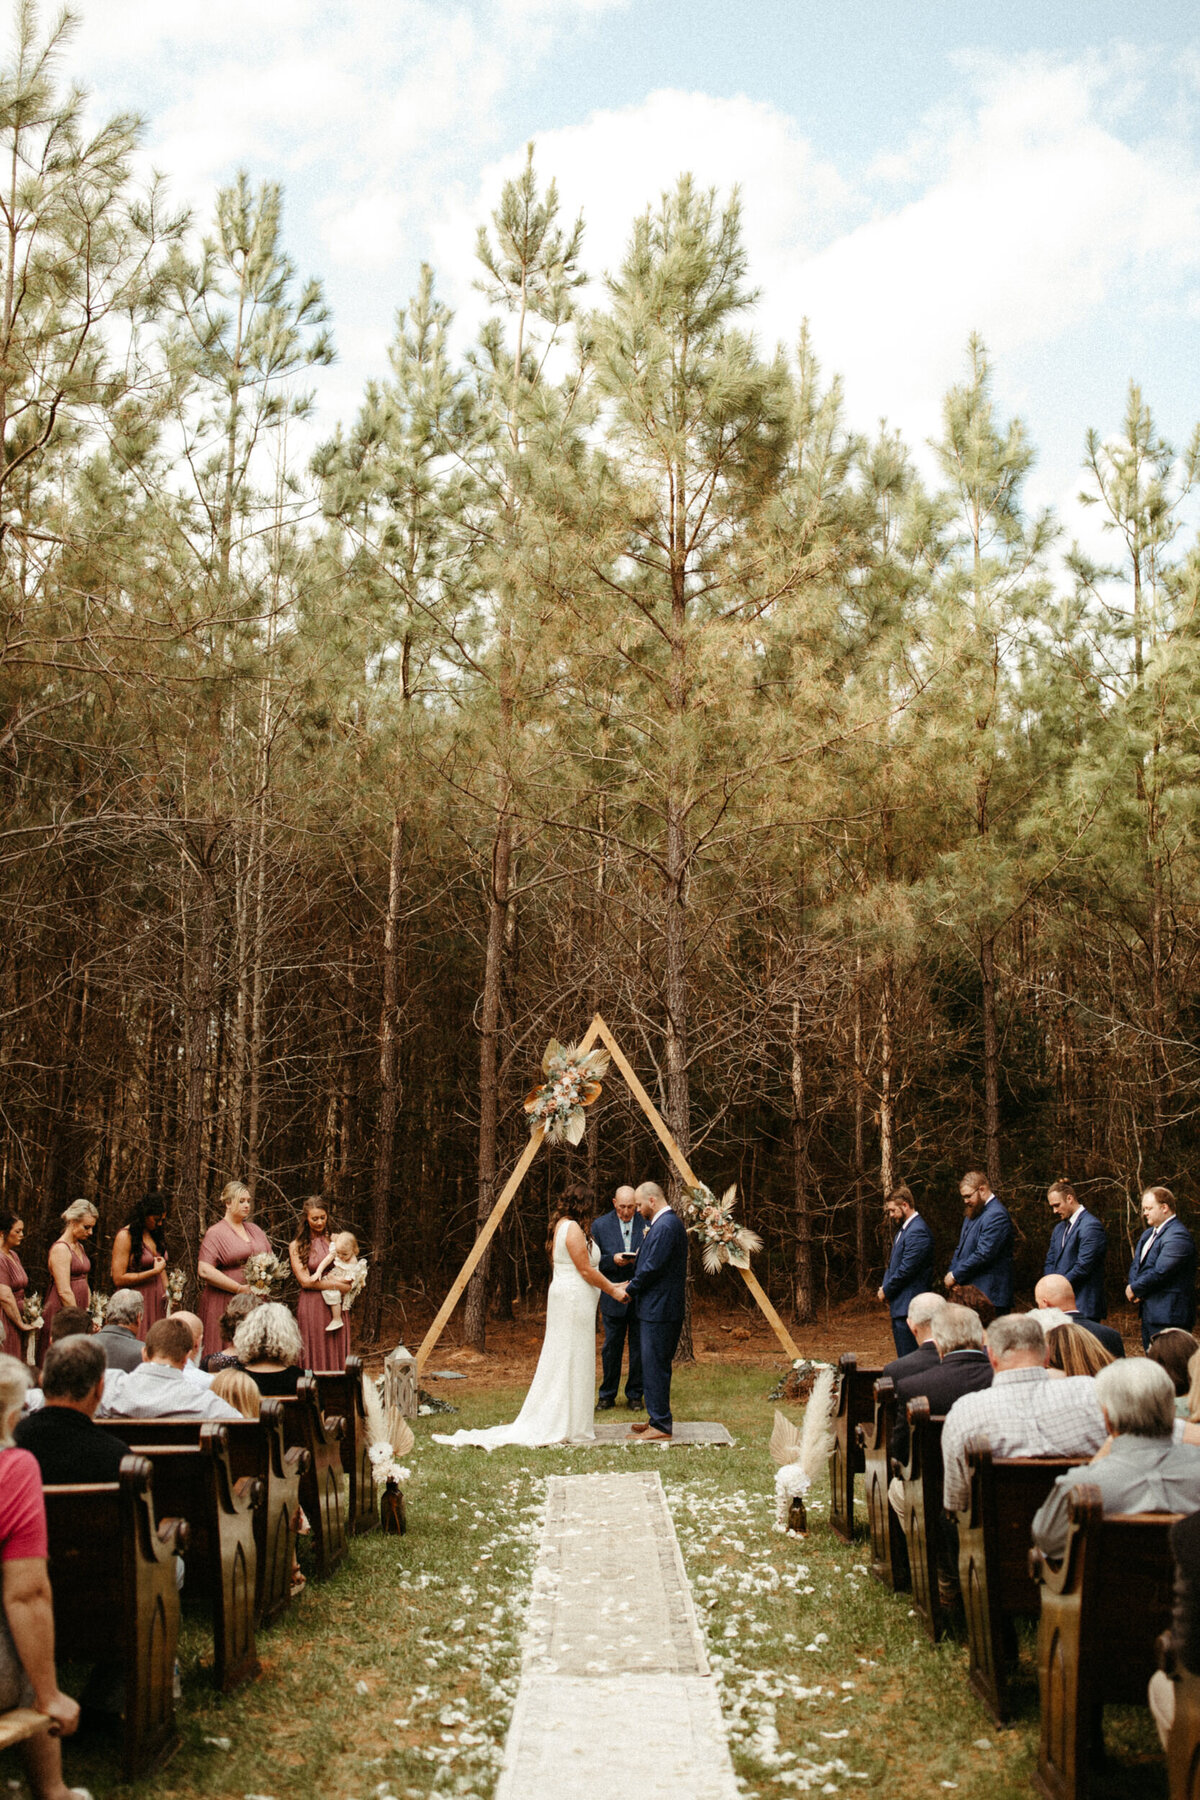 Boho wedding ceremony in the woods with vintage rugs on the aisle leading to the bride and groom standing holding hands under a triangle arch